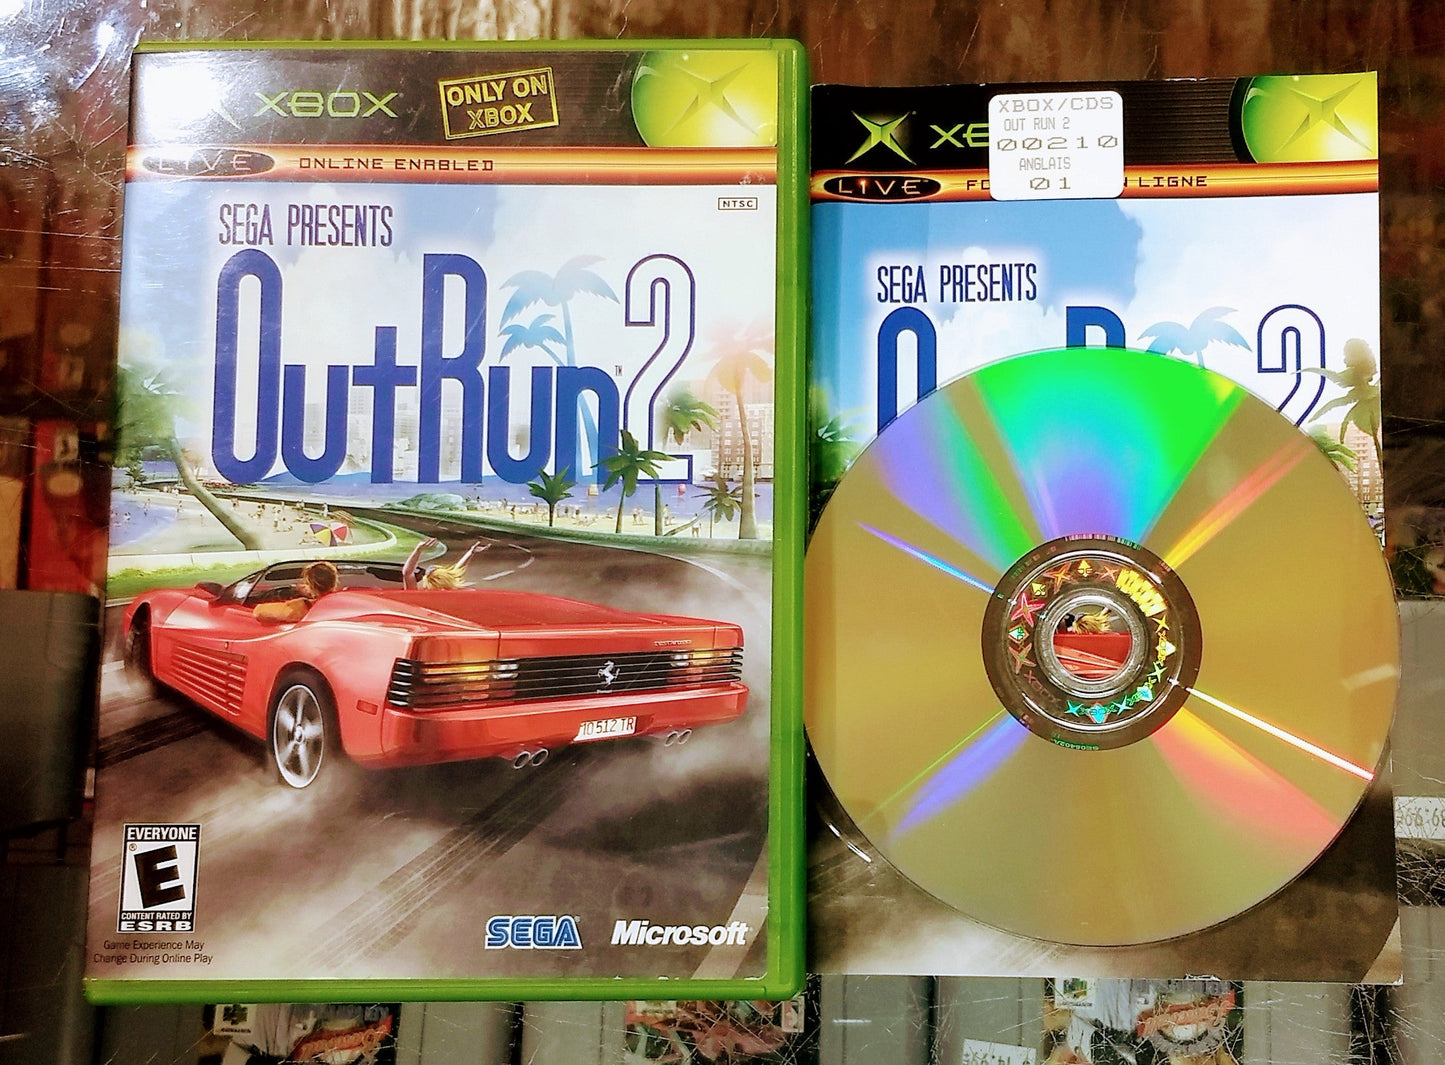 OUTRUN 2 (XBOX) - jeux video game-x